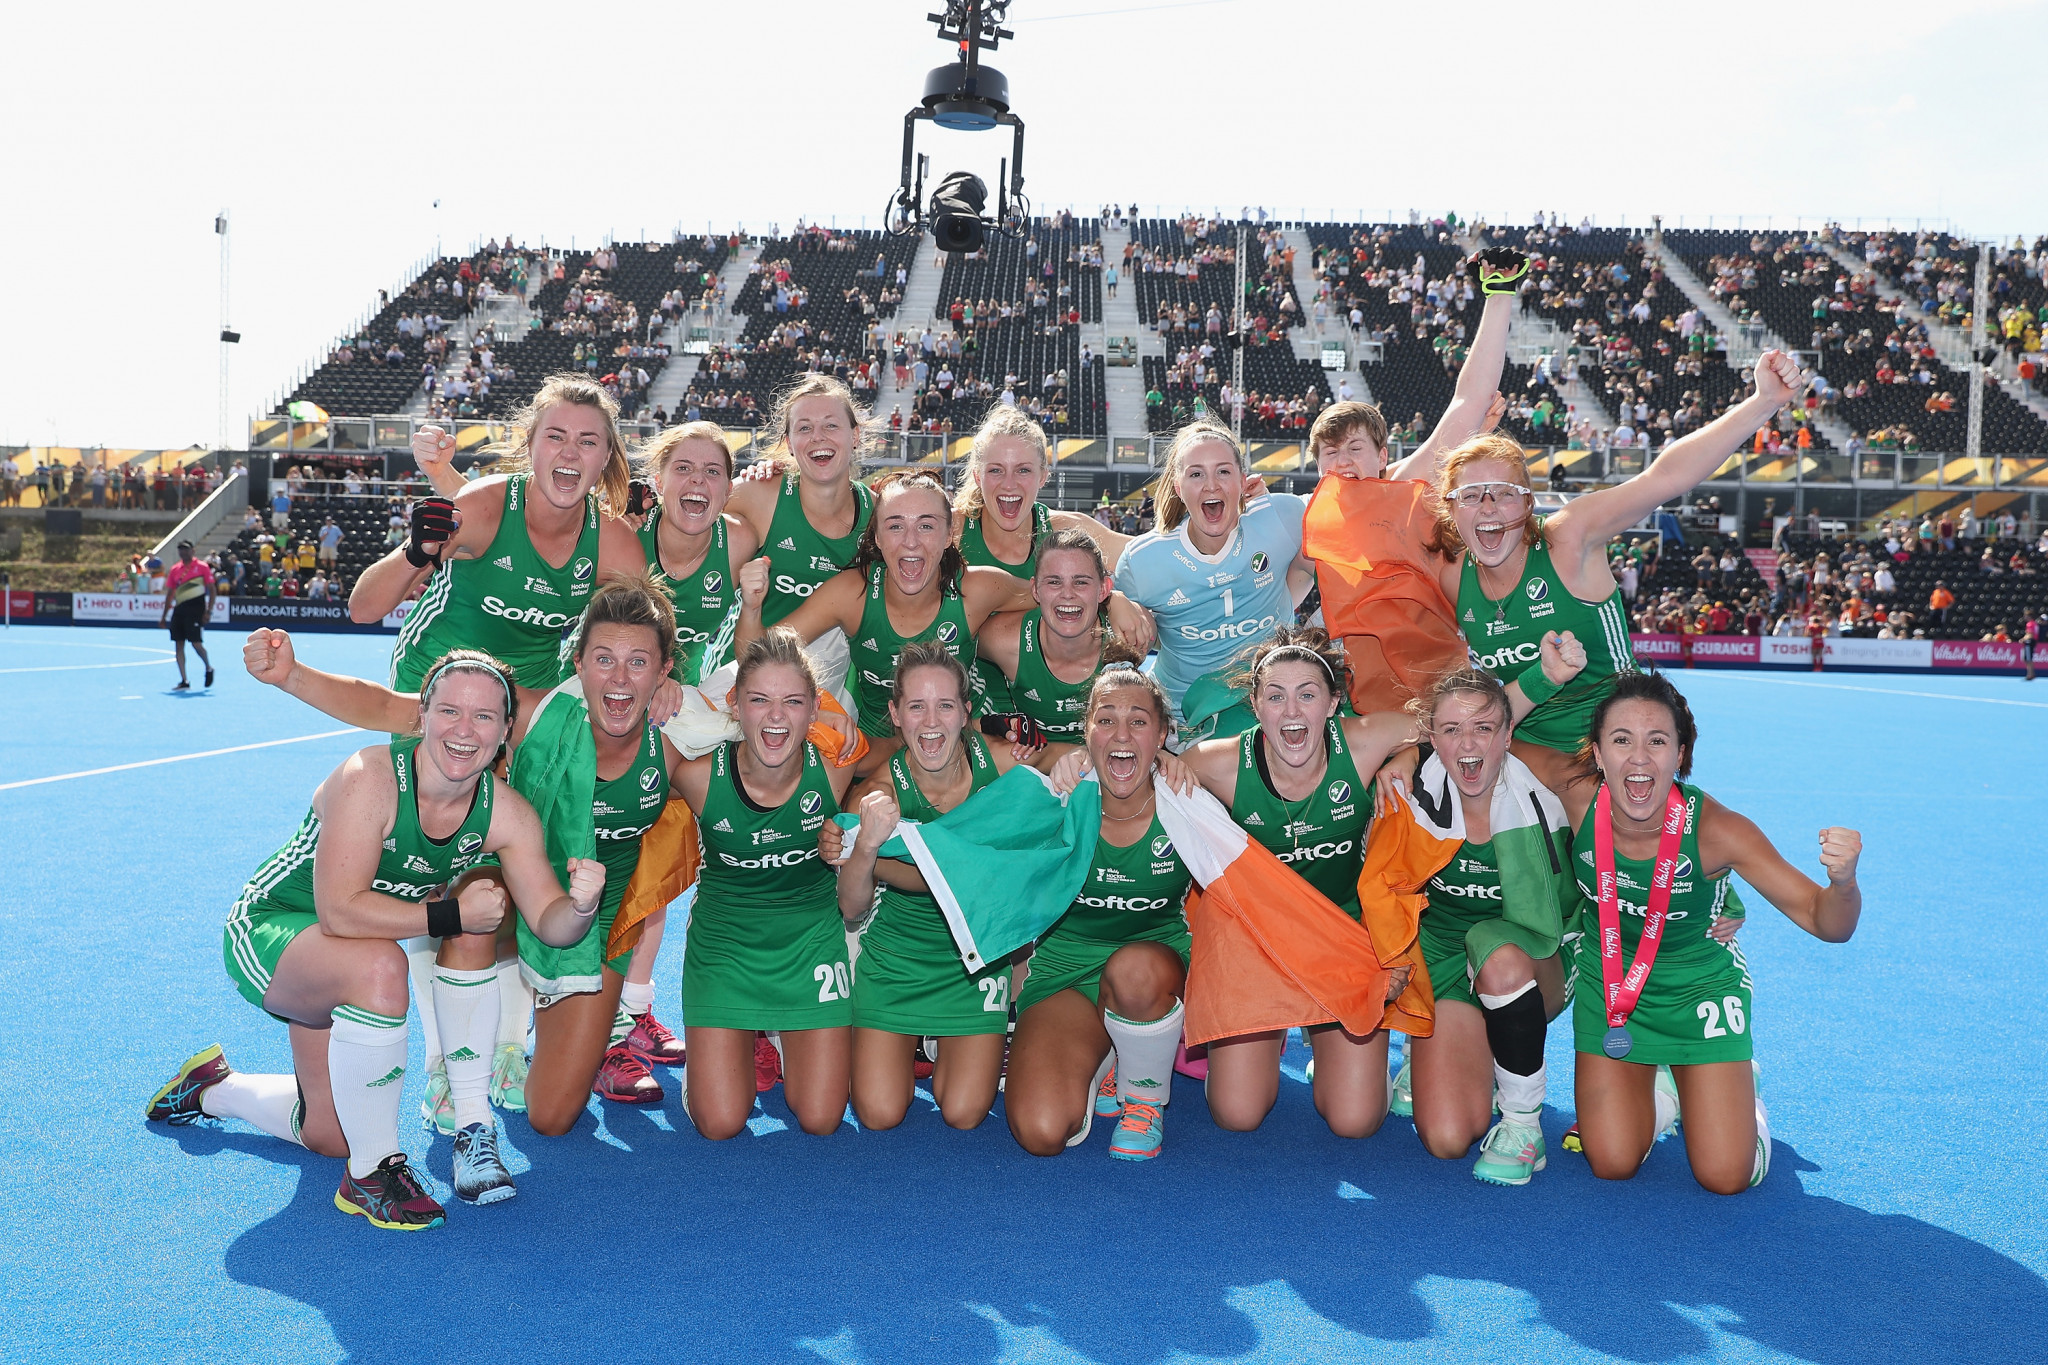 Historic win for Ireland as reach final of FIH Women's Hockey World Cup